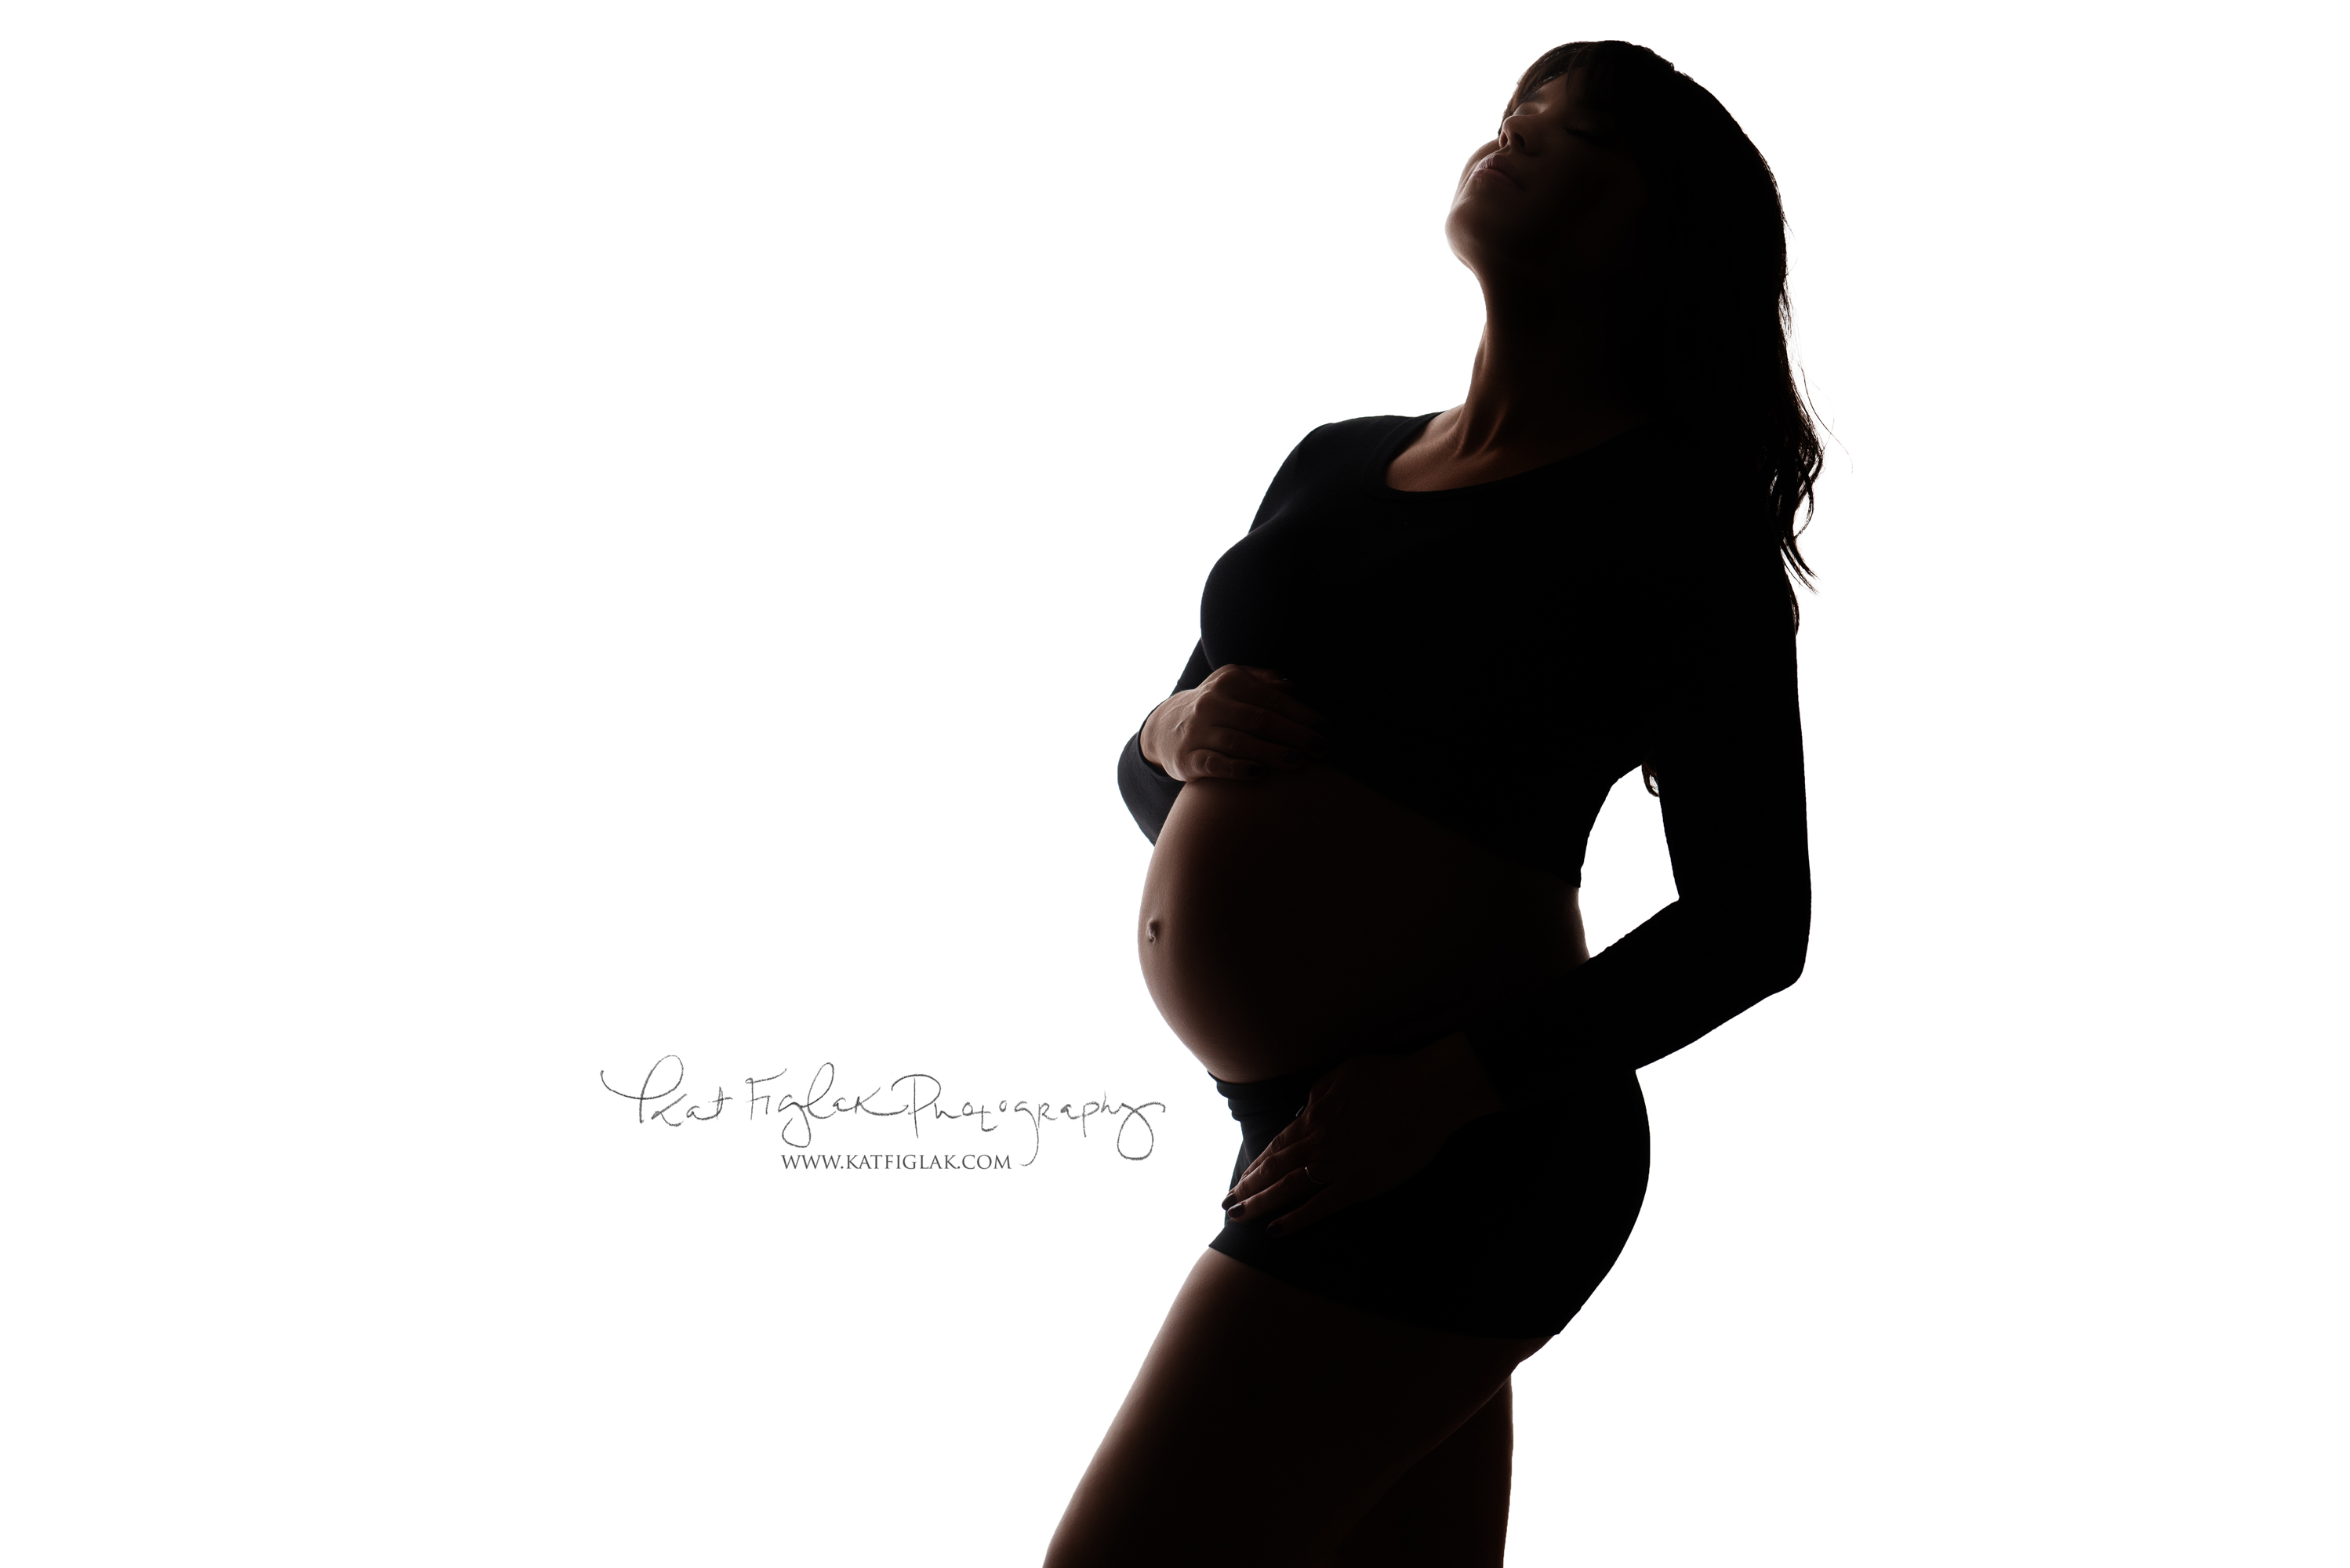 Backlit silhouette shot of a pregnant woman